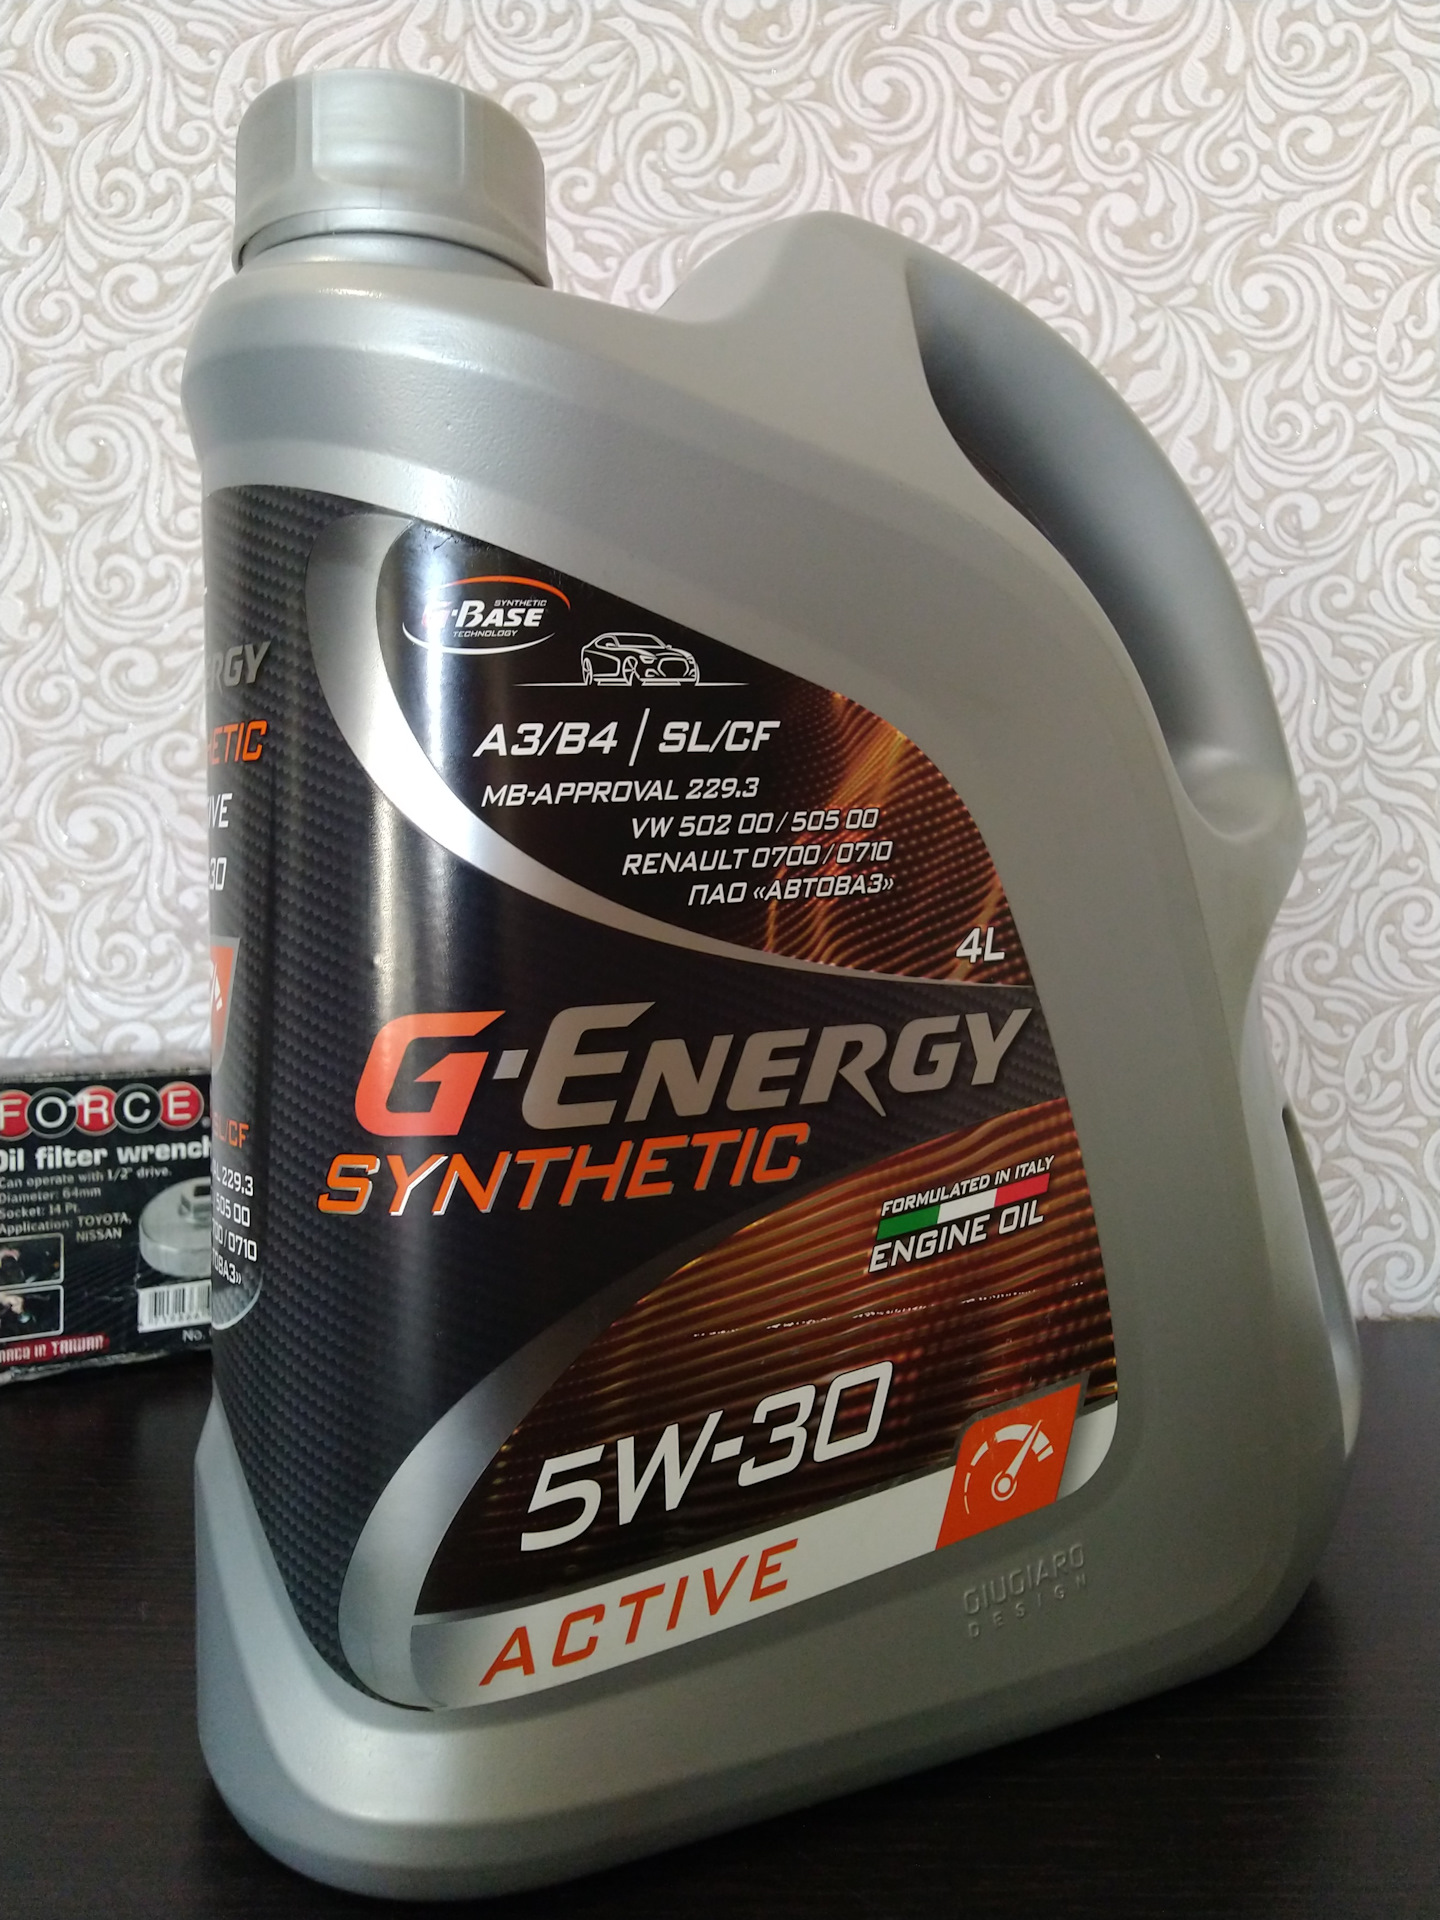 Synthetic active 5w40